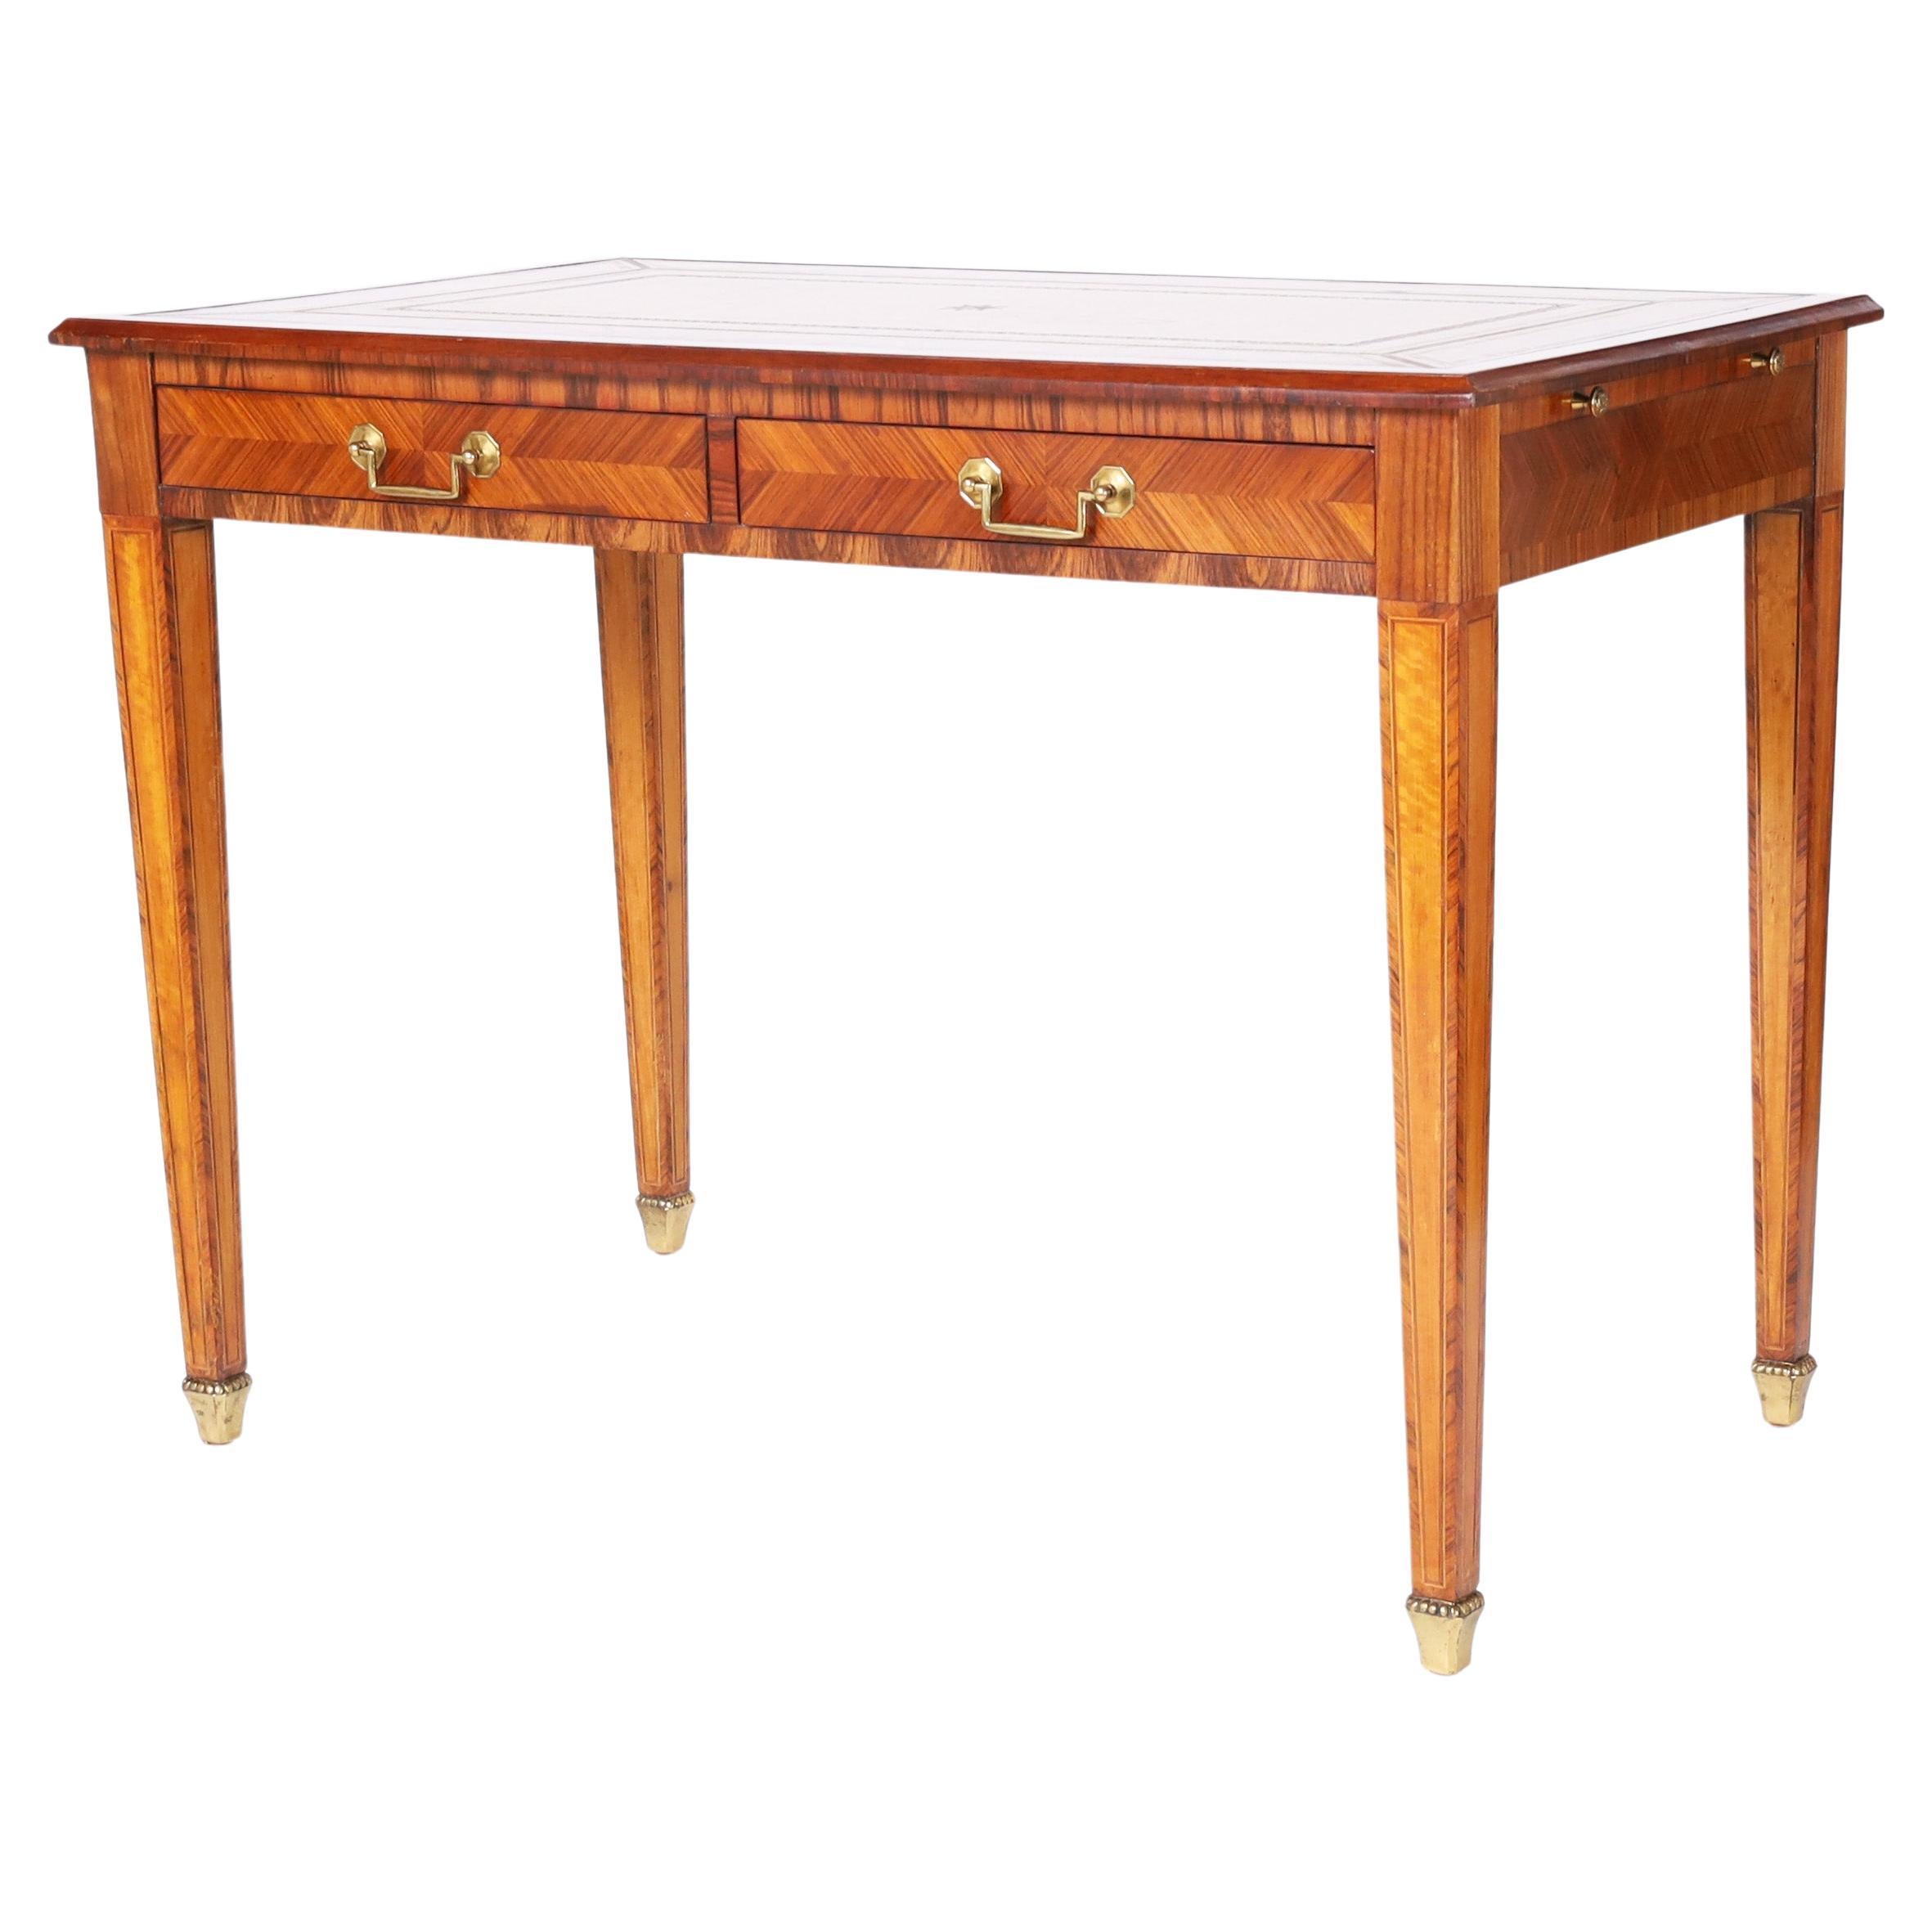 Maitland-Smith Vintage Leather Top Rosewood Desk